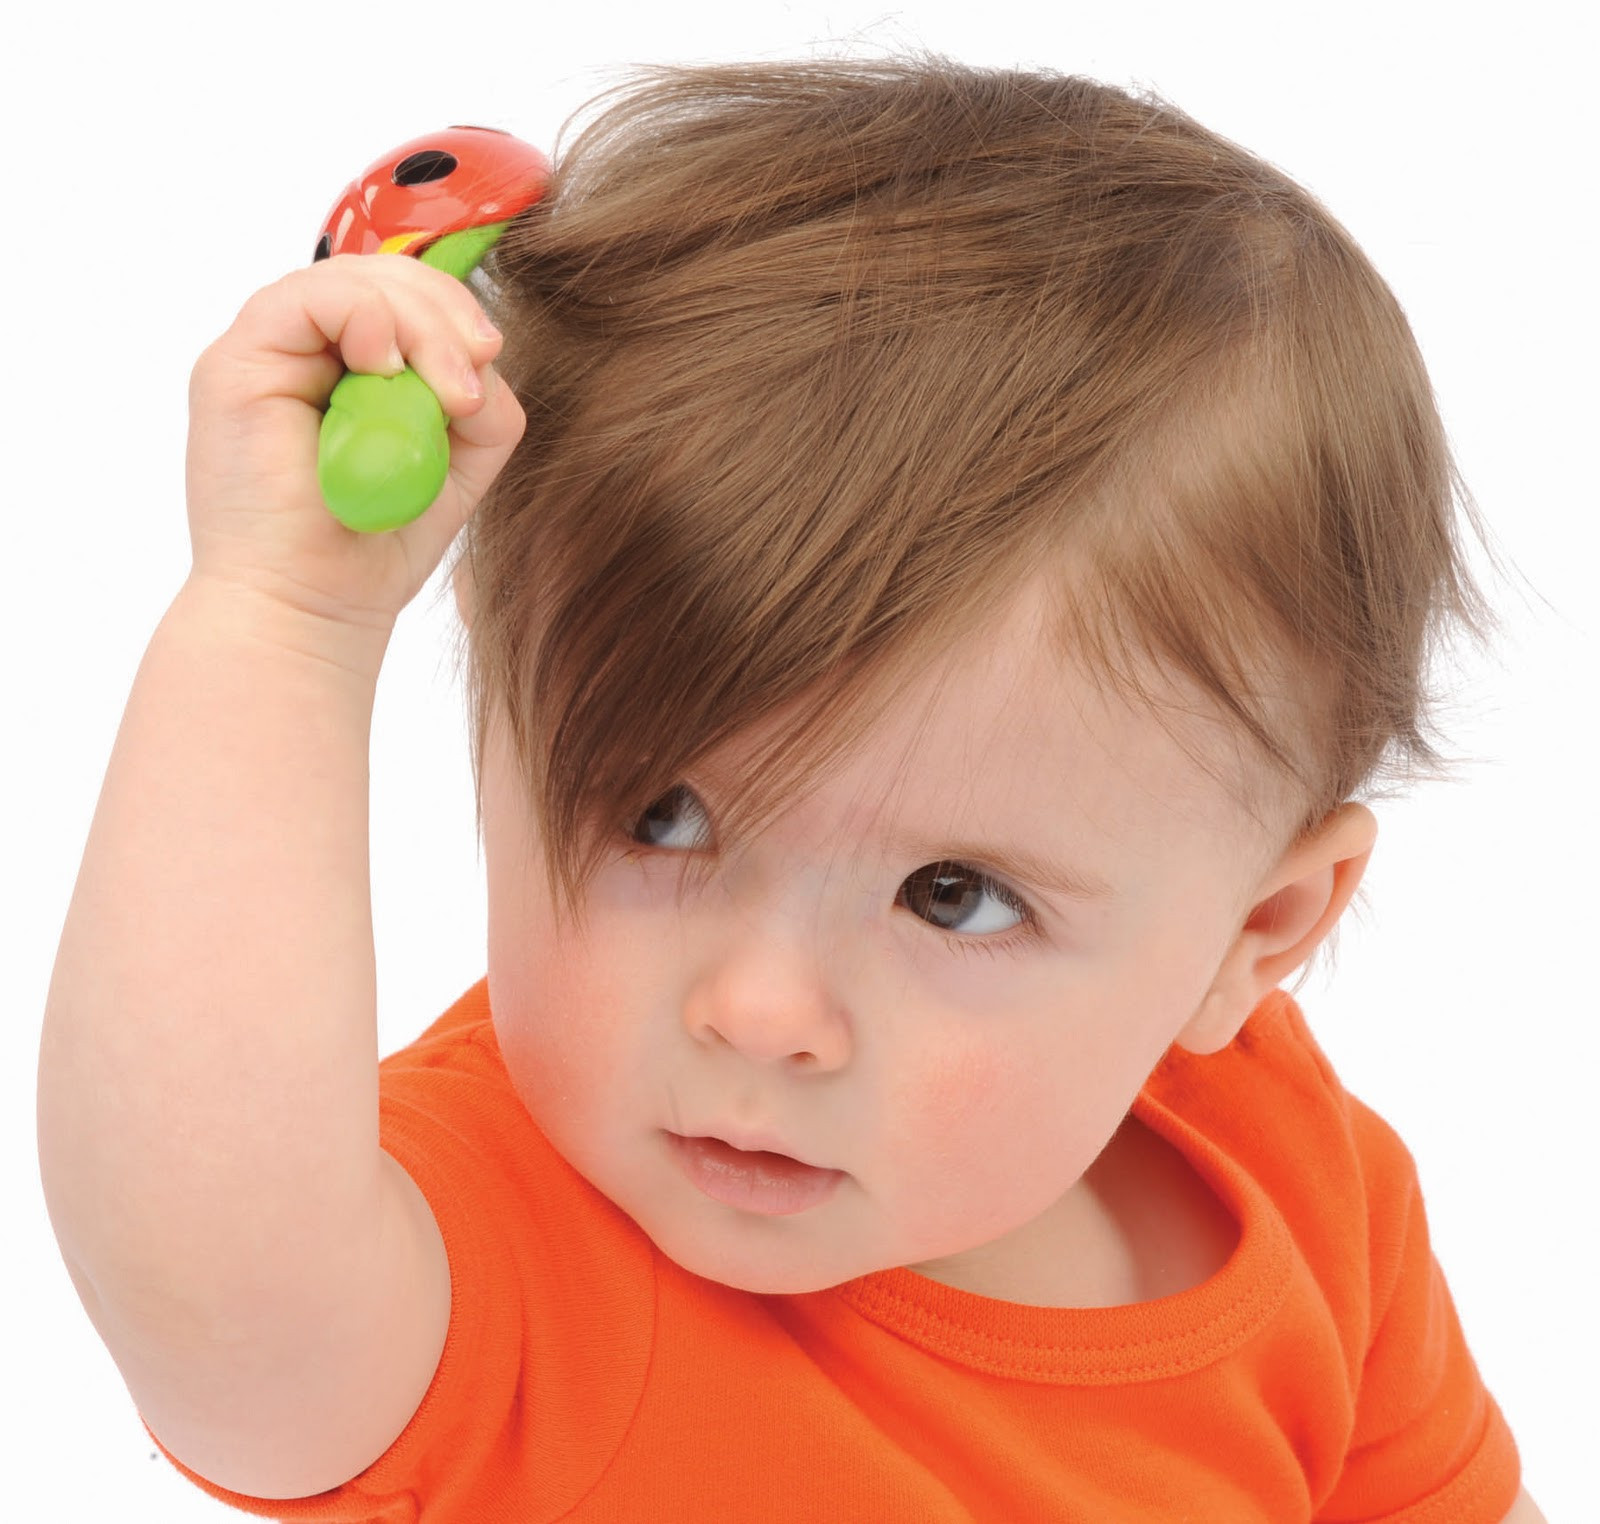 Baby Boy Hair Products
 Hair care for baby